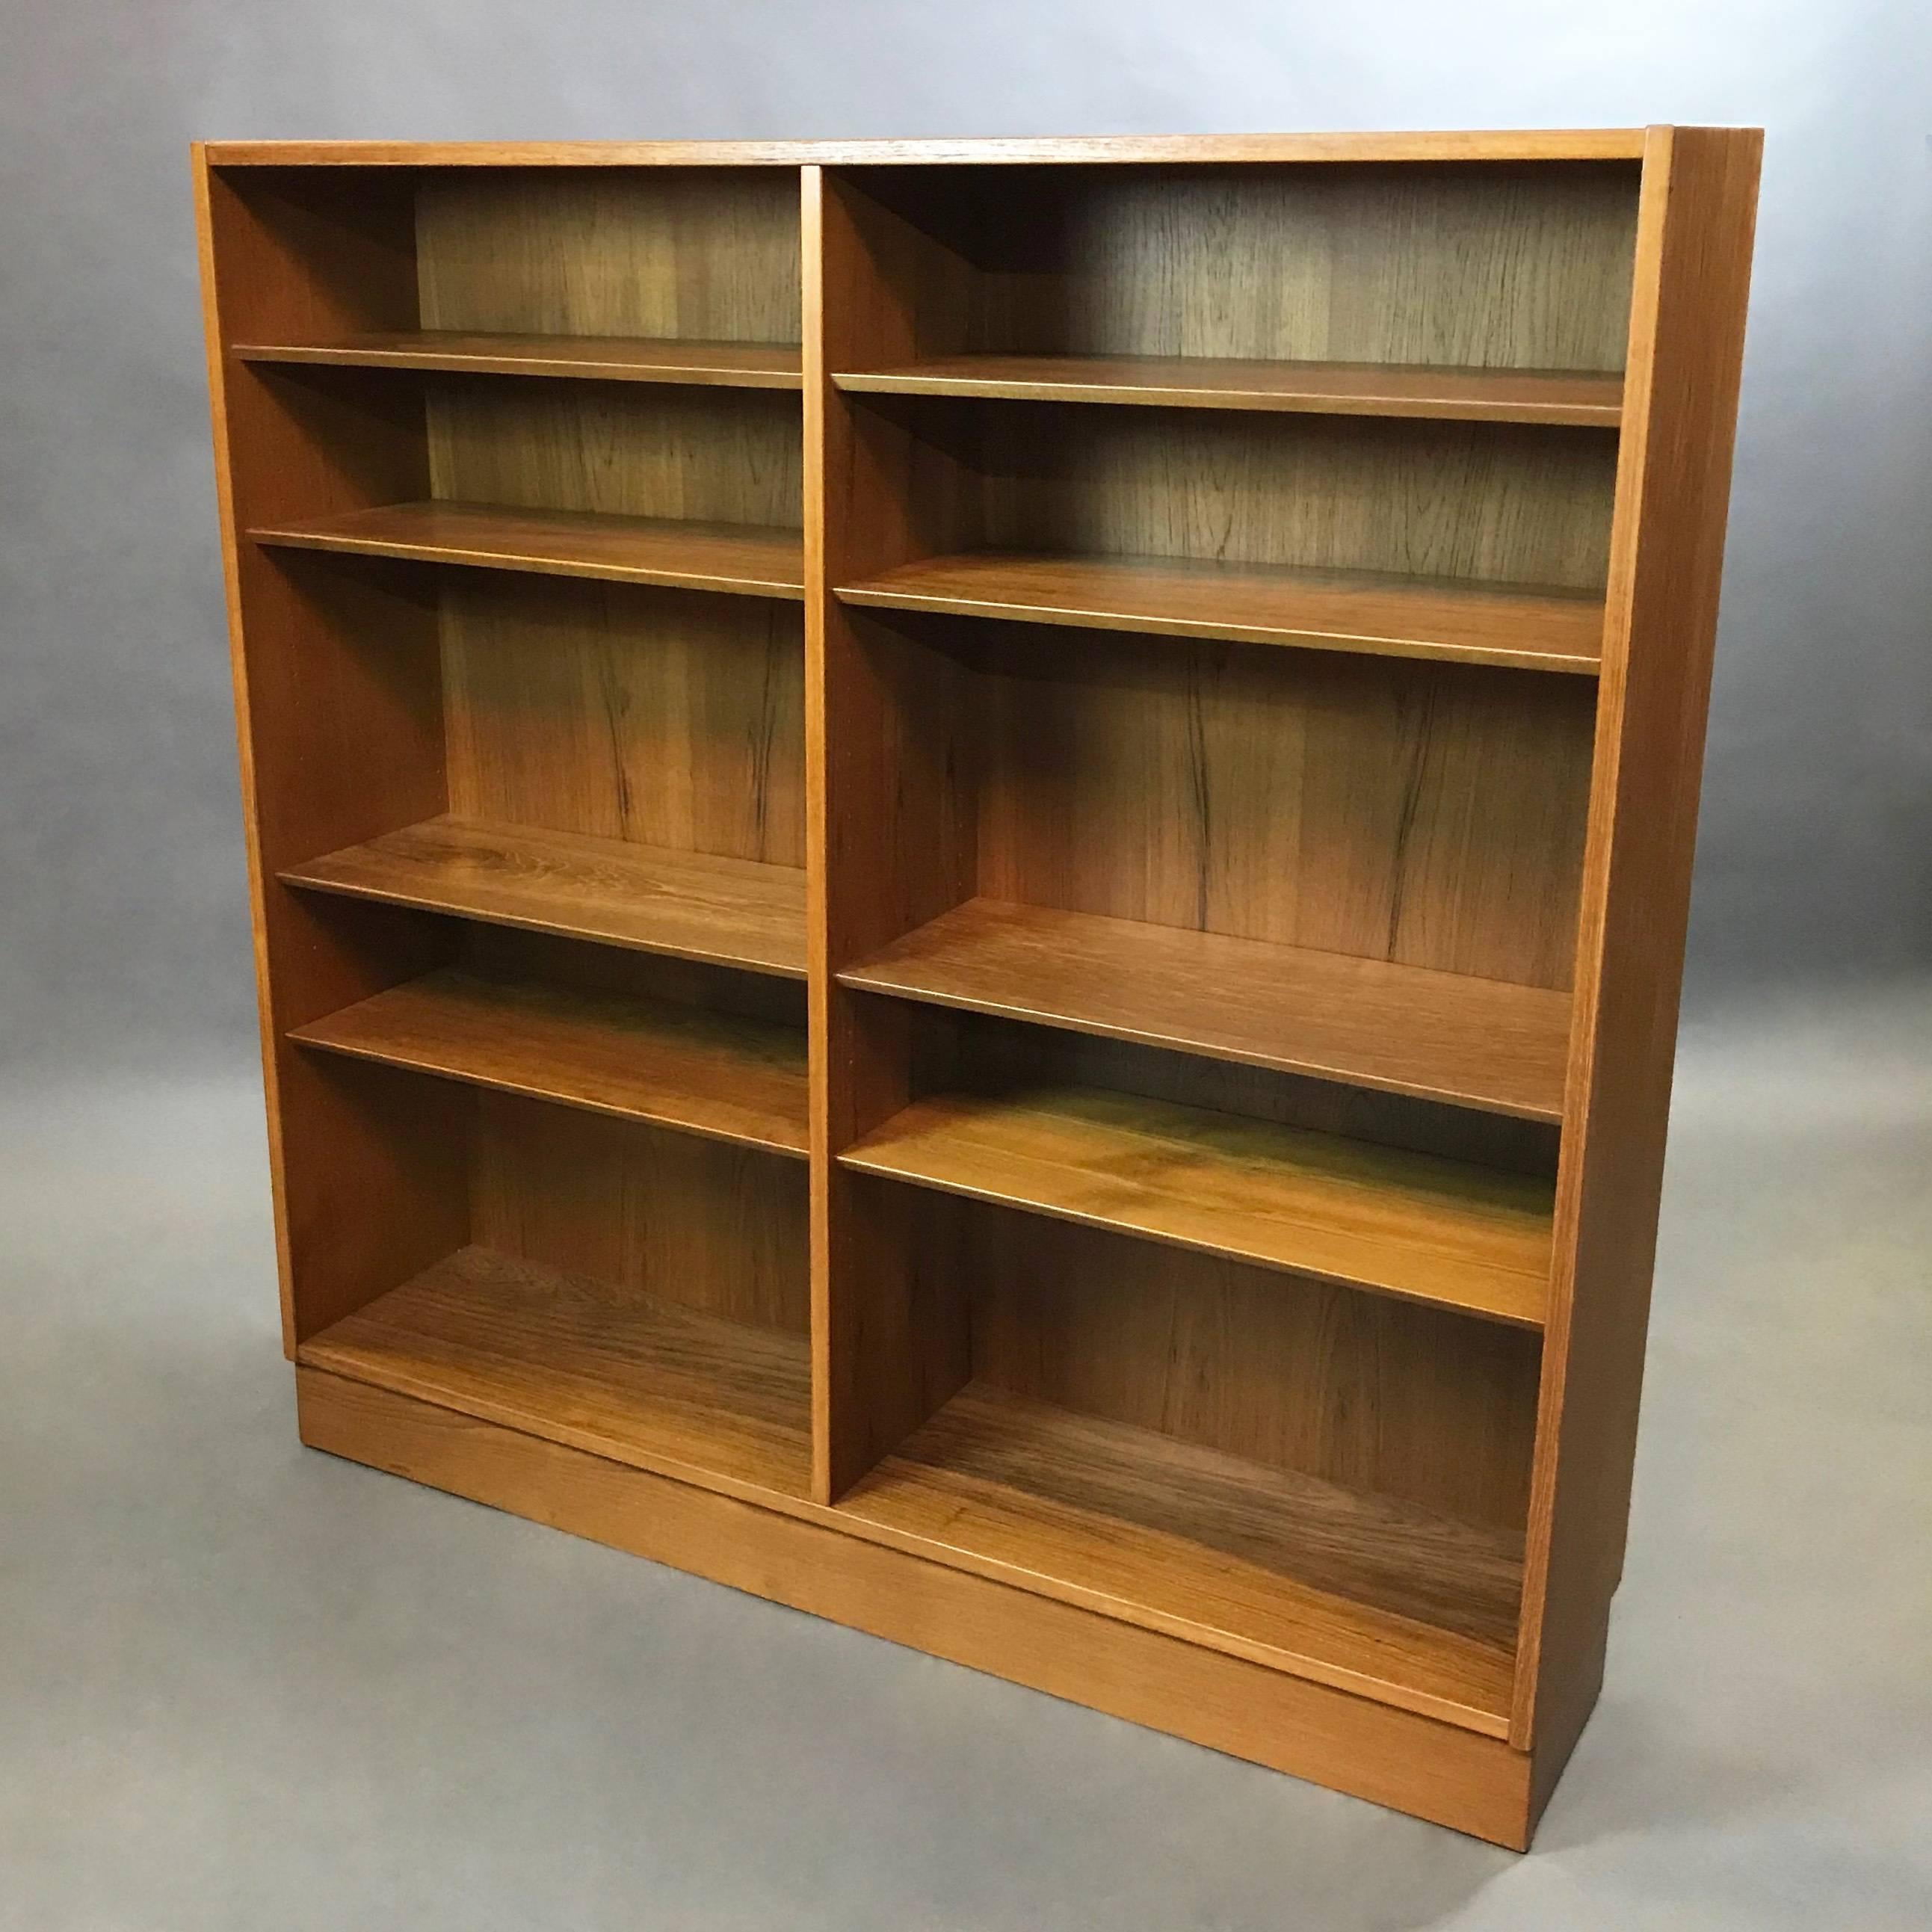 Mid-century modern, teak, book case or display cabinet features a middle divider with adjustable shelves with beveled edges. 